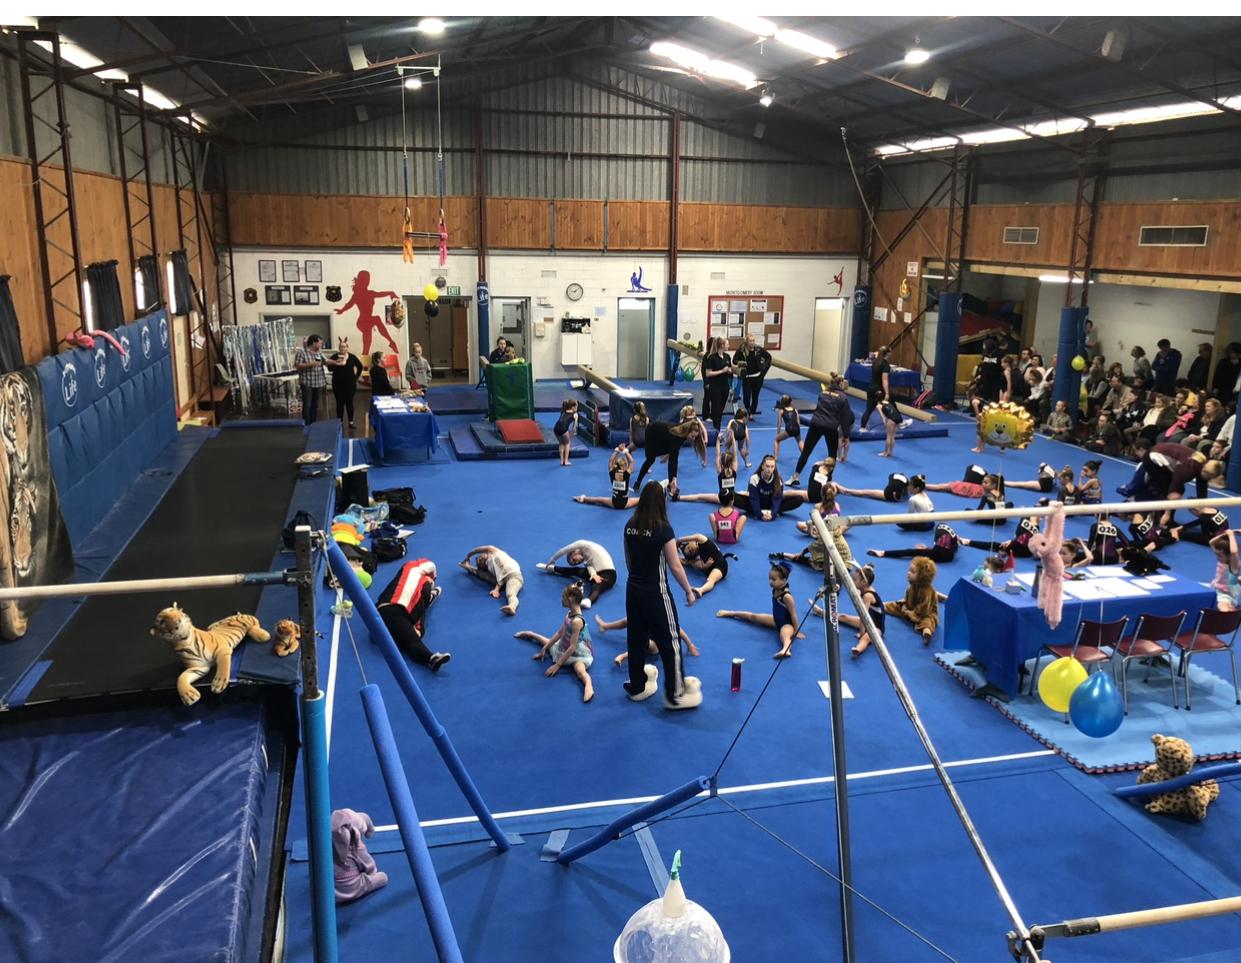 All Boys and All Girls Club - Queenstown Gymnastics | gym | 131 Long St, Queenstown SA 5014, Australia | 0403354075 OR 